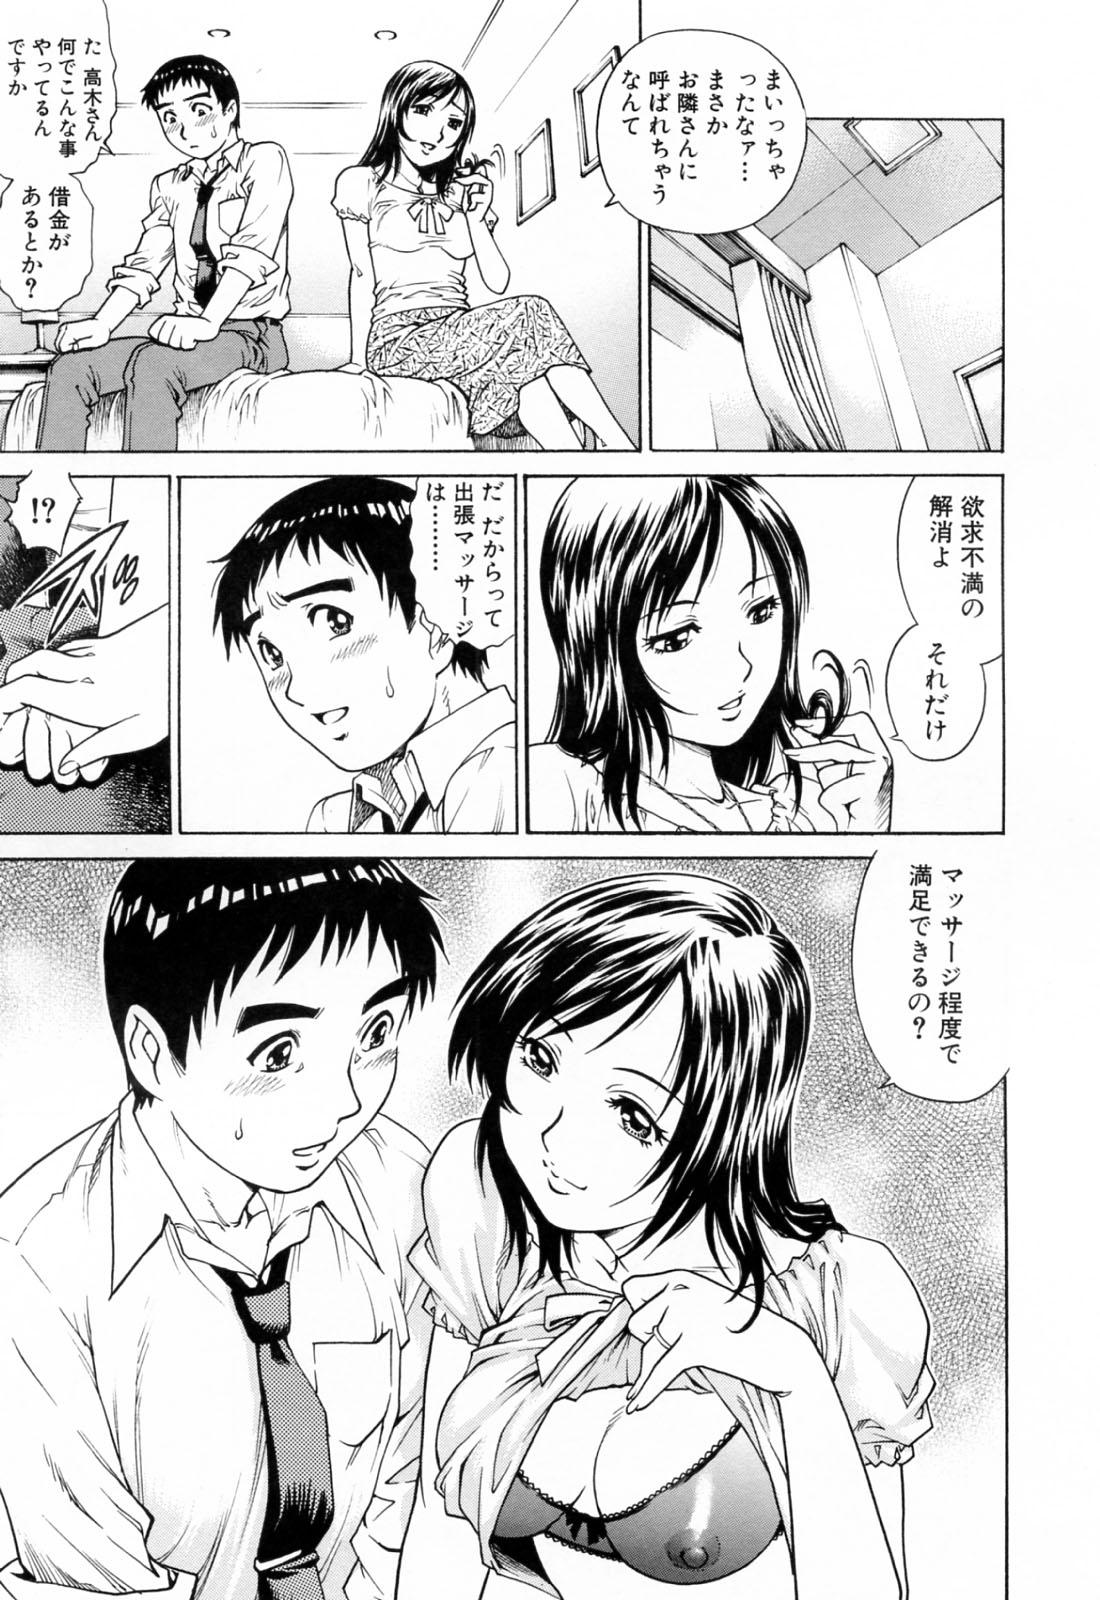 Upskirt Ero Tissue Old Vs Young - Page 13